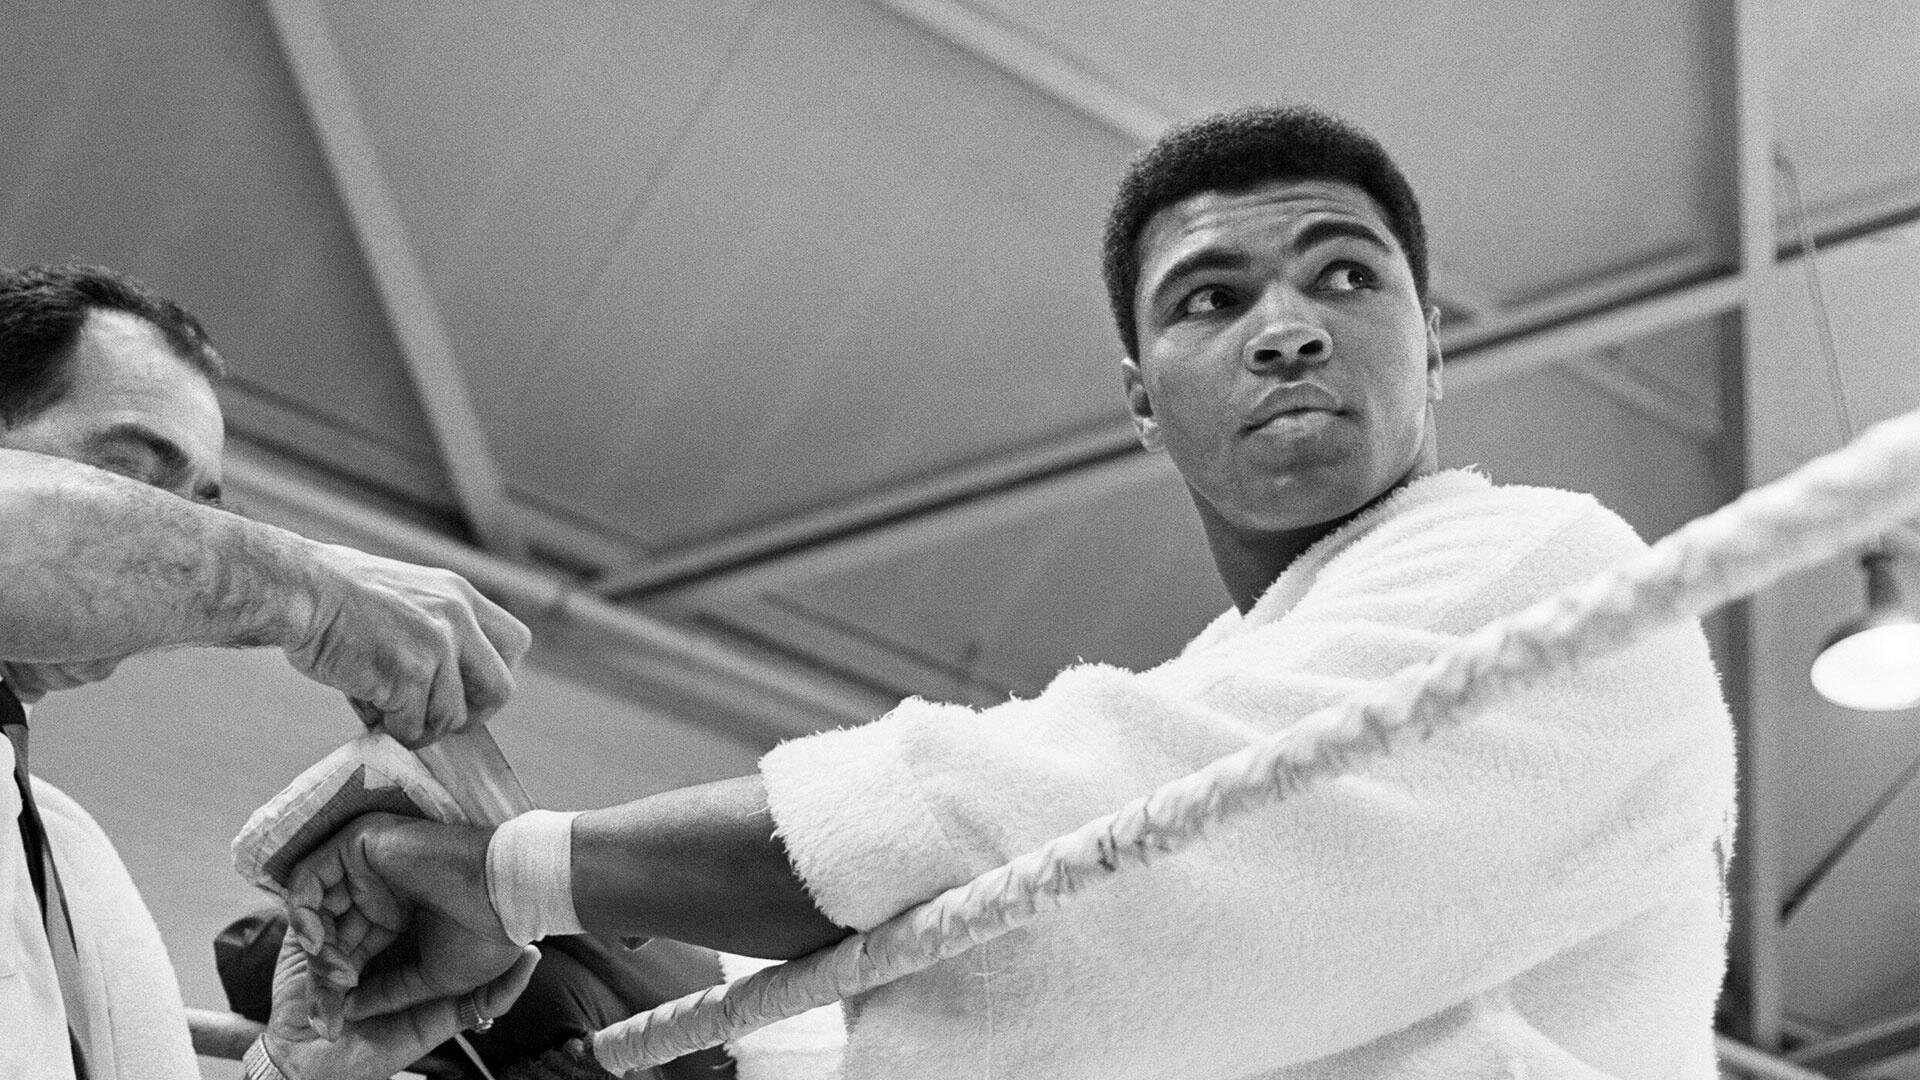 Muhammad Ali S1E2 Round Two: What's My Name? (1964-1970)